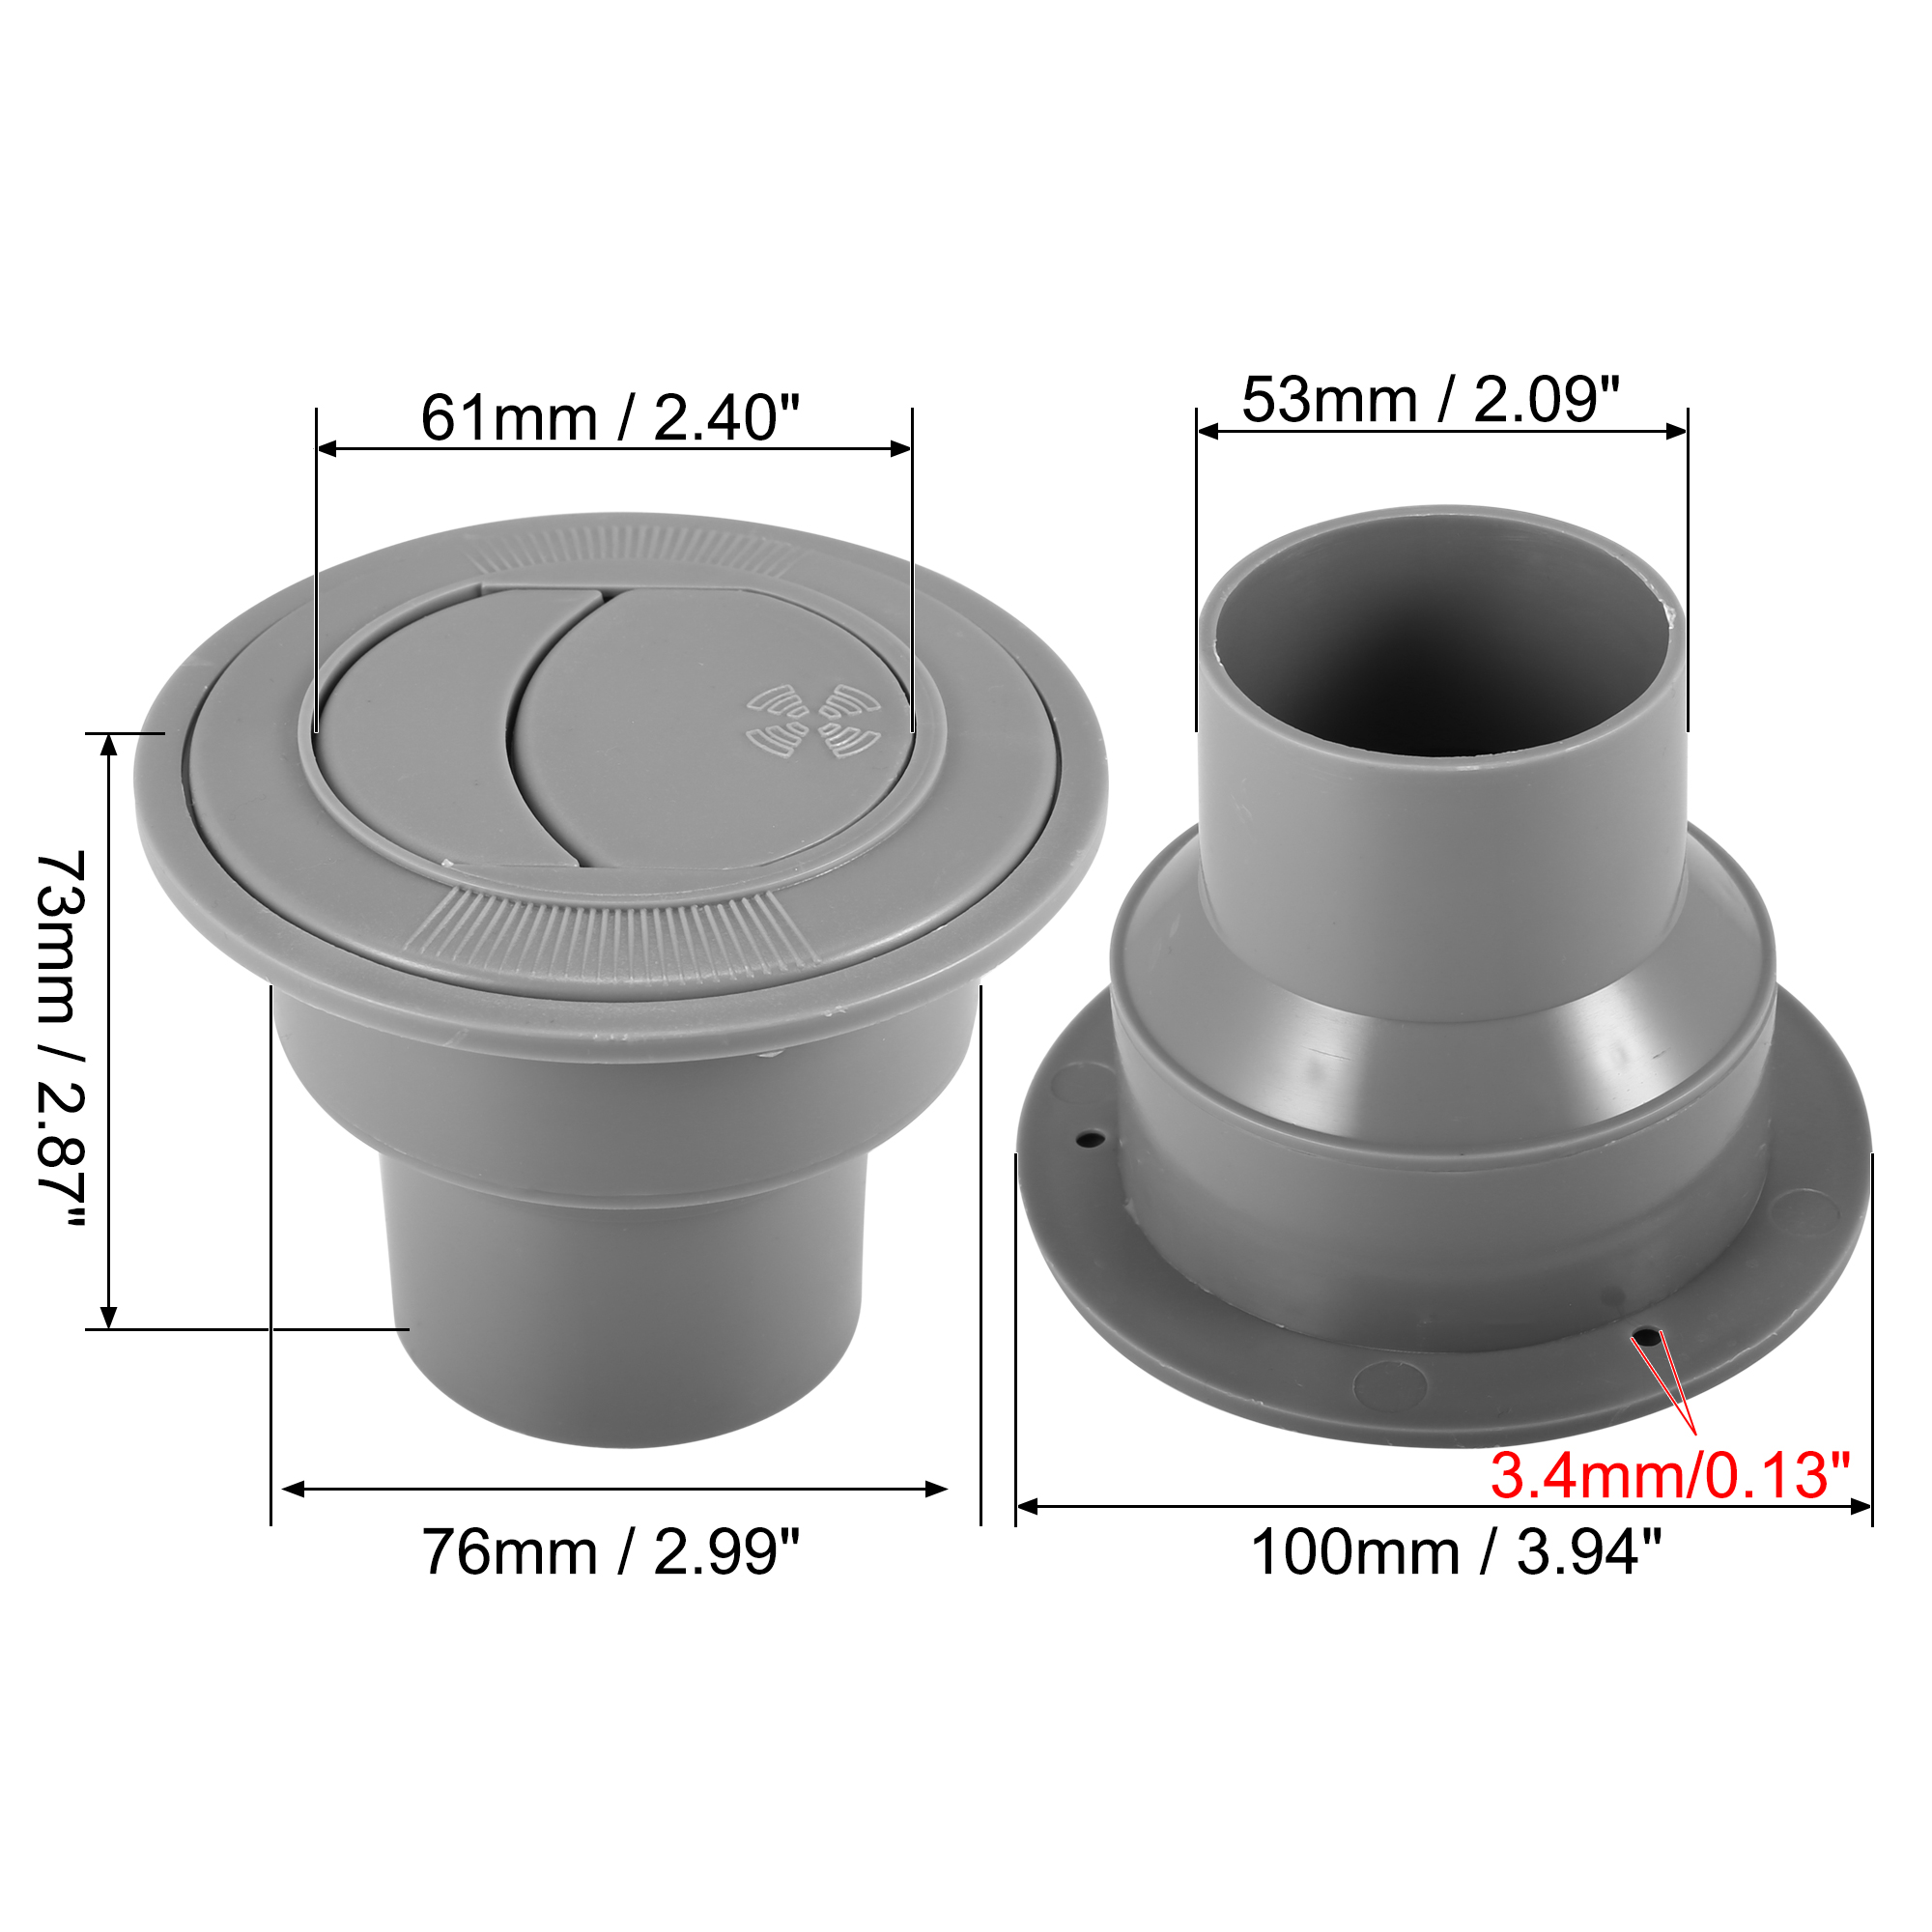 Unique Bargains 4pcs Universal 61mm Vent Air Outlet Rotating Round Ceiling Gray for Car Bus RV